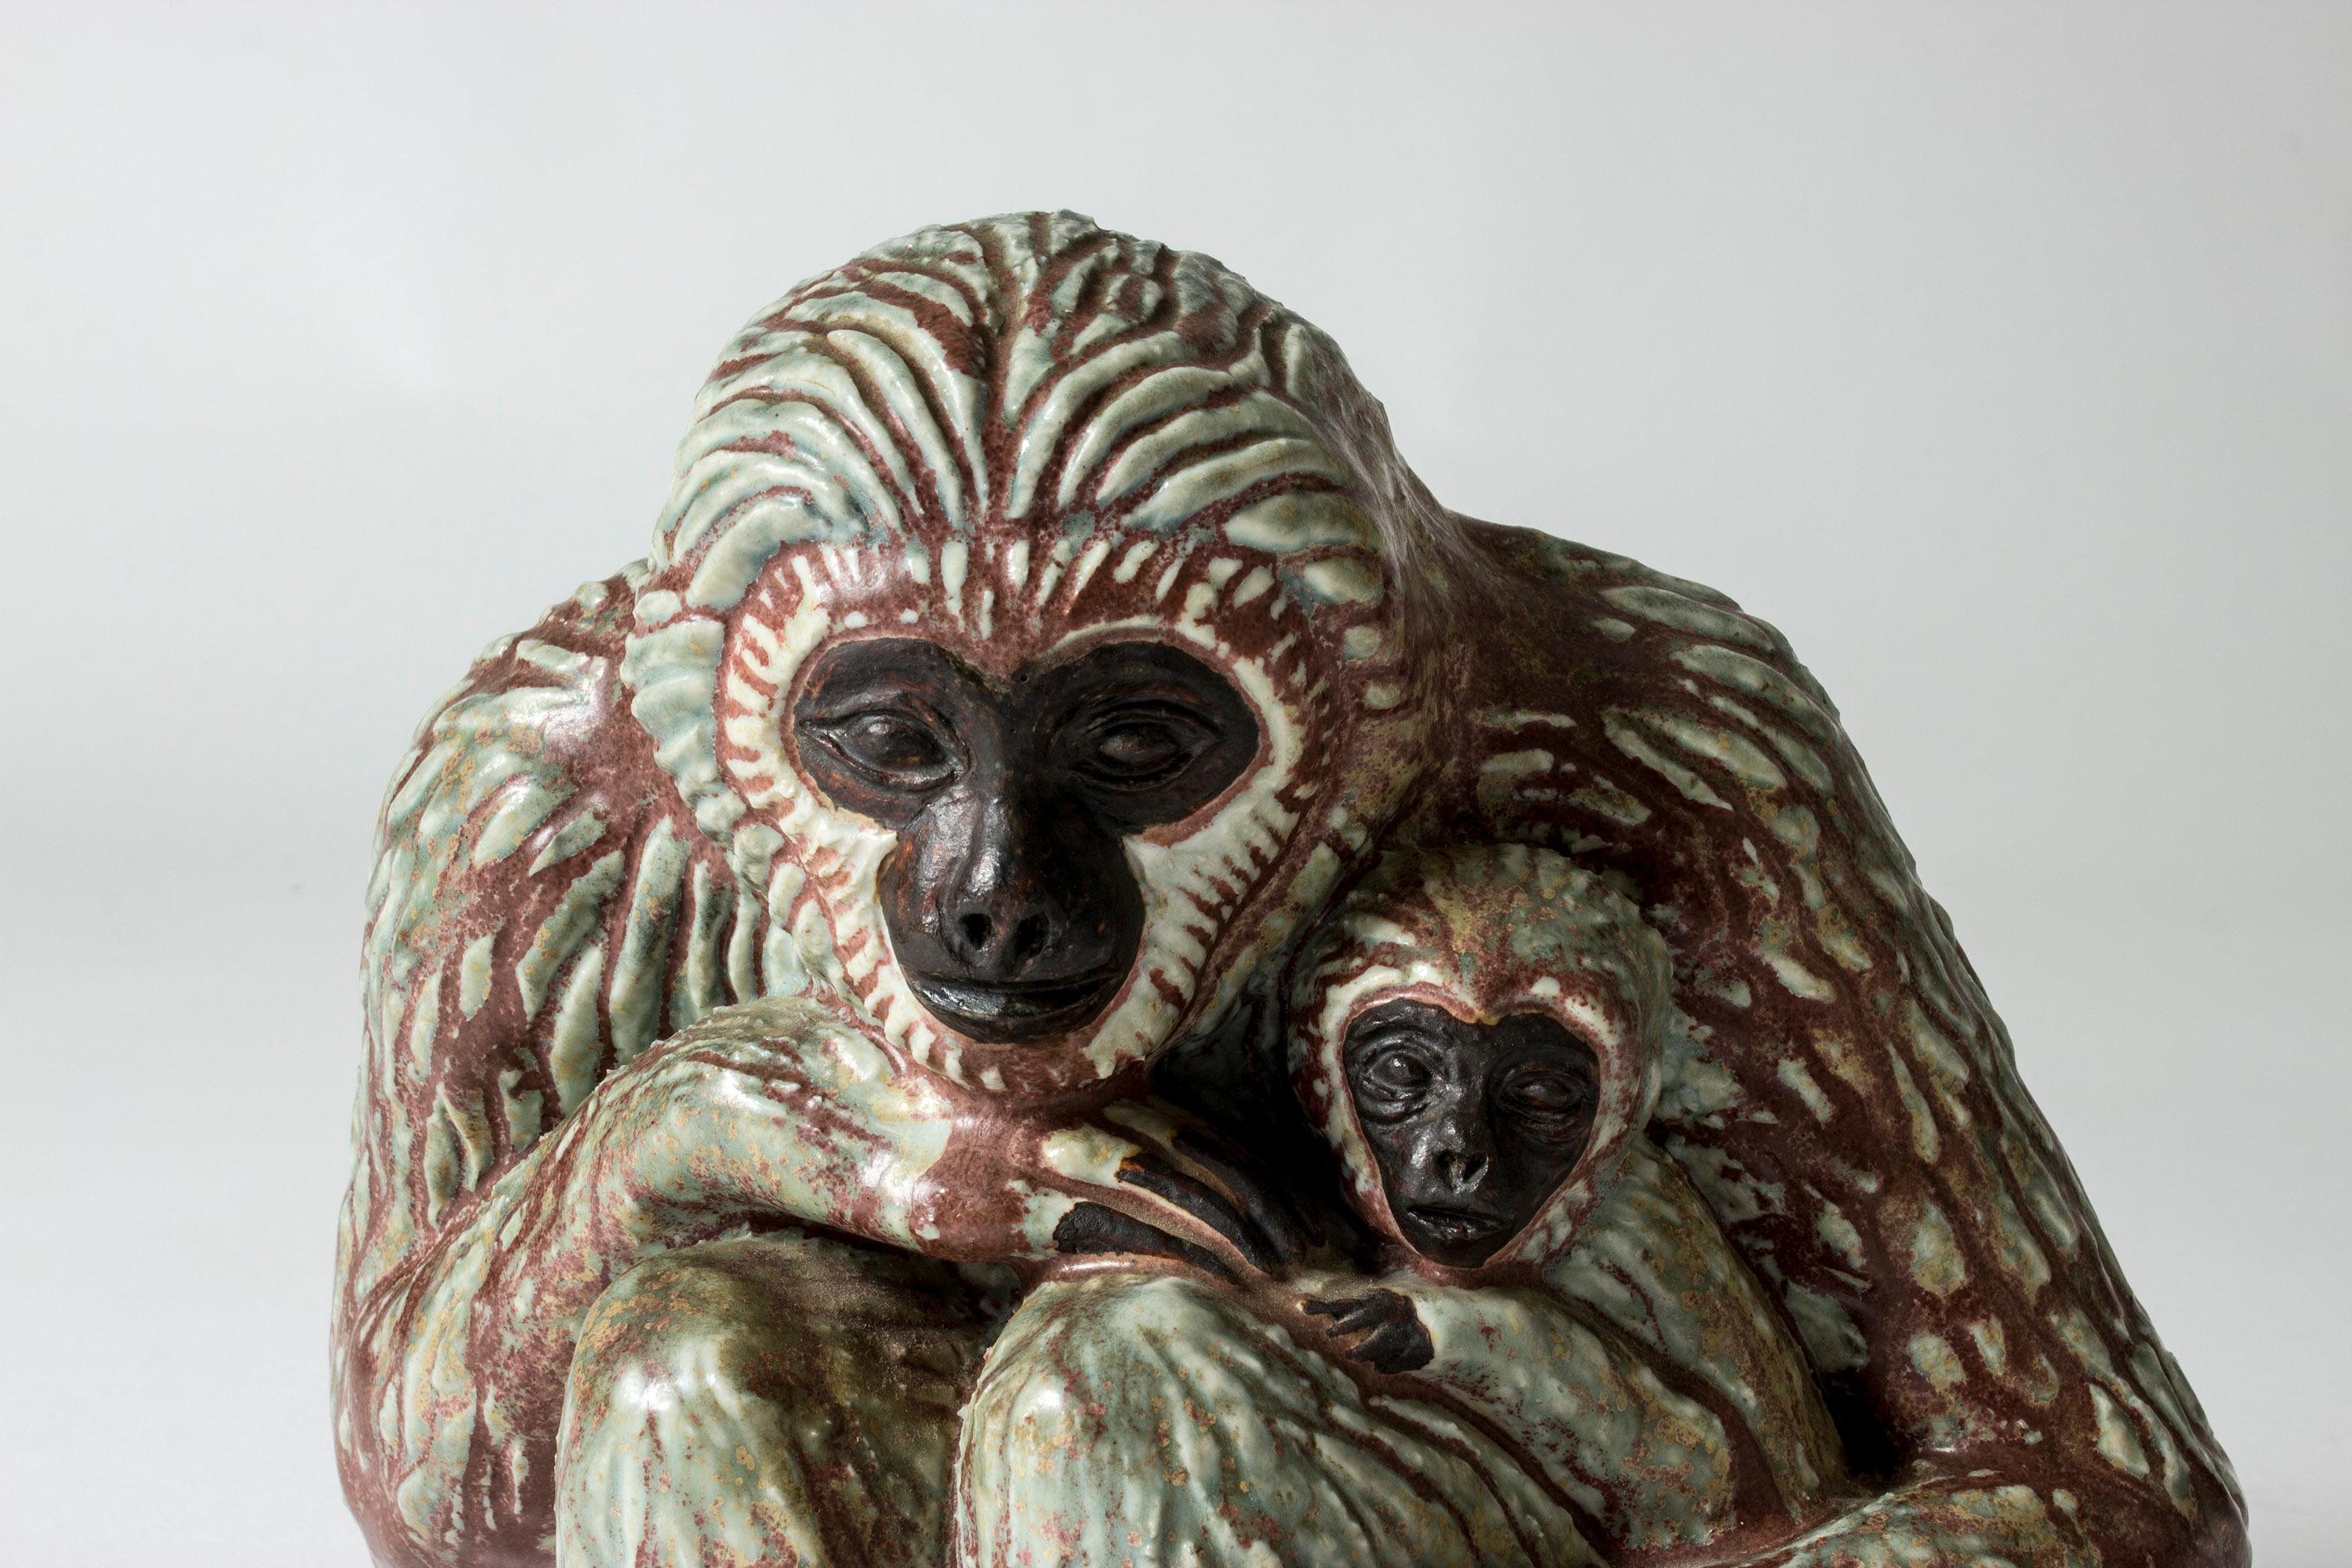 Lovely stoneware figurine by Gunnar Nylund, depicting a monkey mother with its baby cradled in its arms. Beautifully sculpted, with a spirited, protective expression. Greenish glaze mixing with oxblood.

Gunnar Nylund’s animal figurines are among